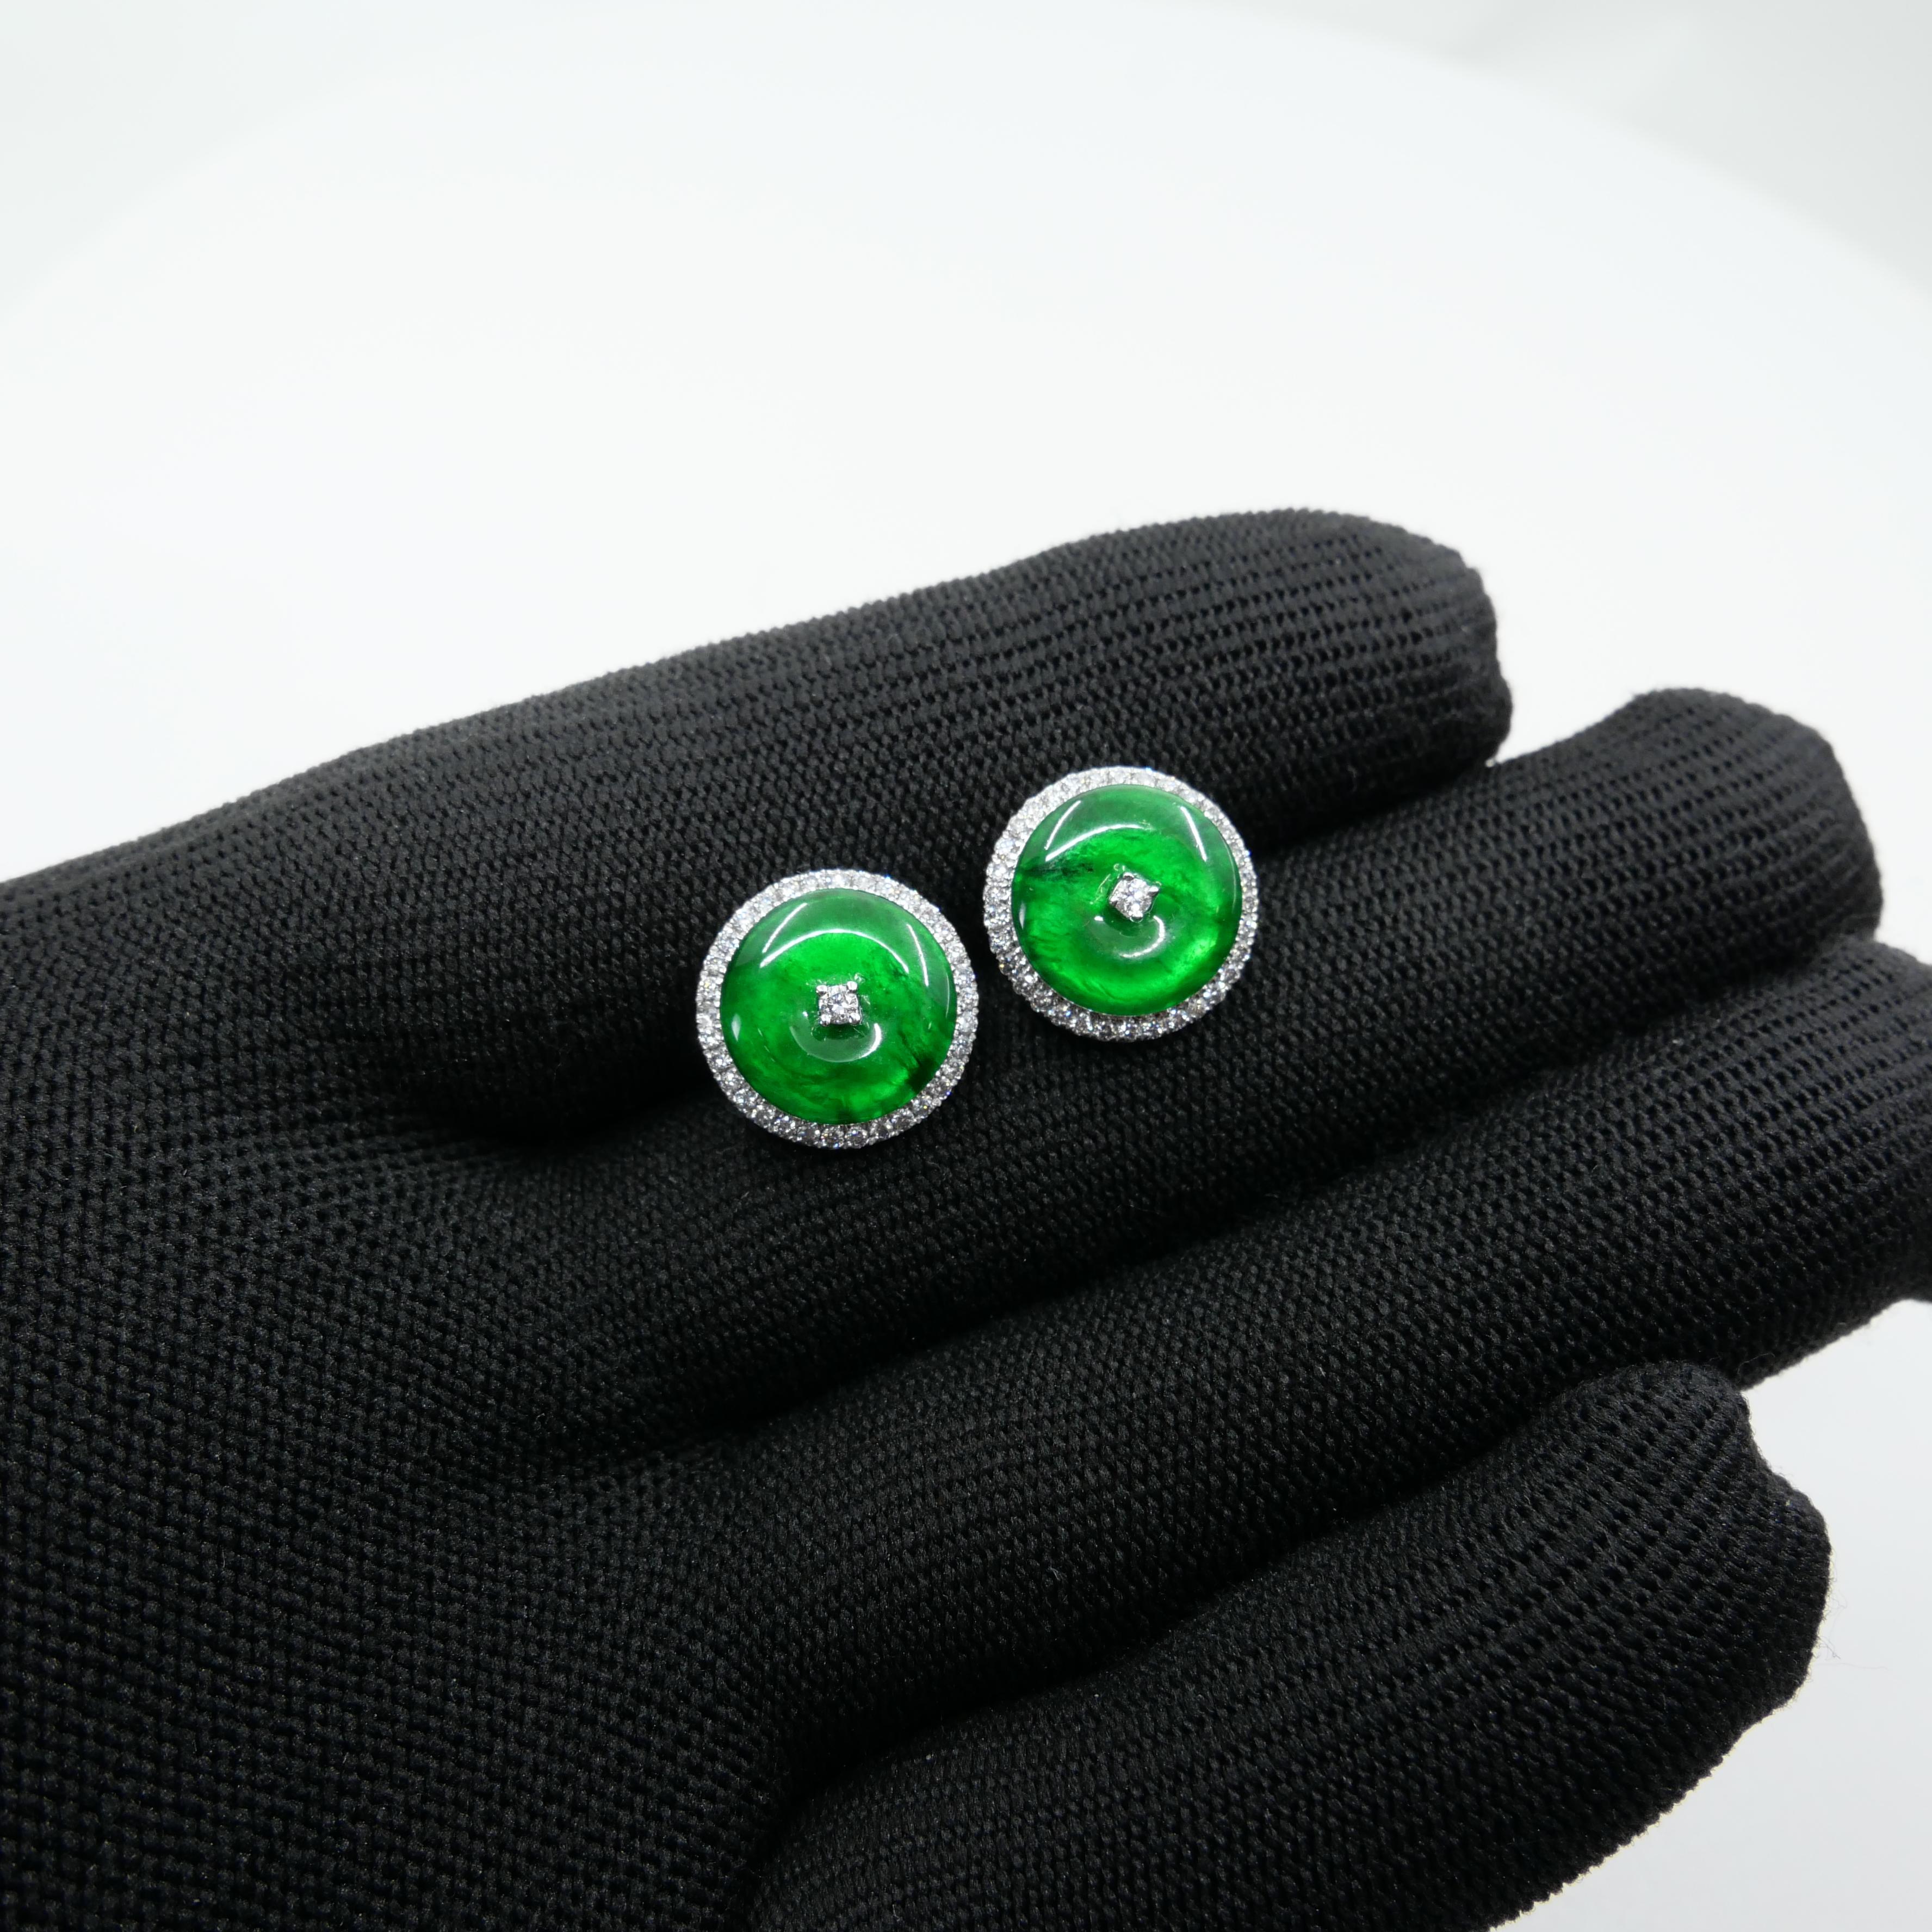 Certified Natural Type A Jadeite Jade And Diamond Earrings. Apple Green Color For Sale 10